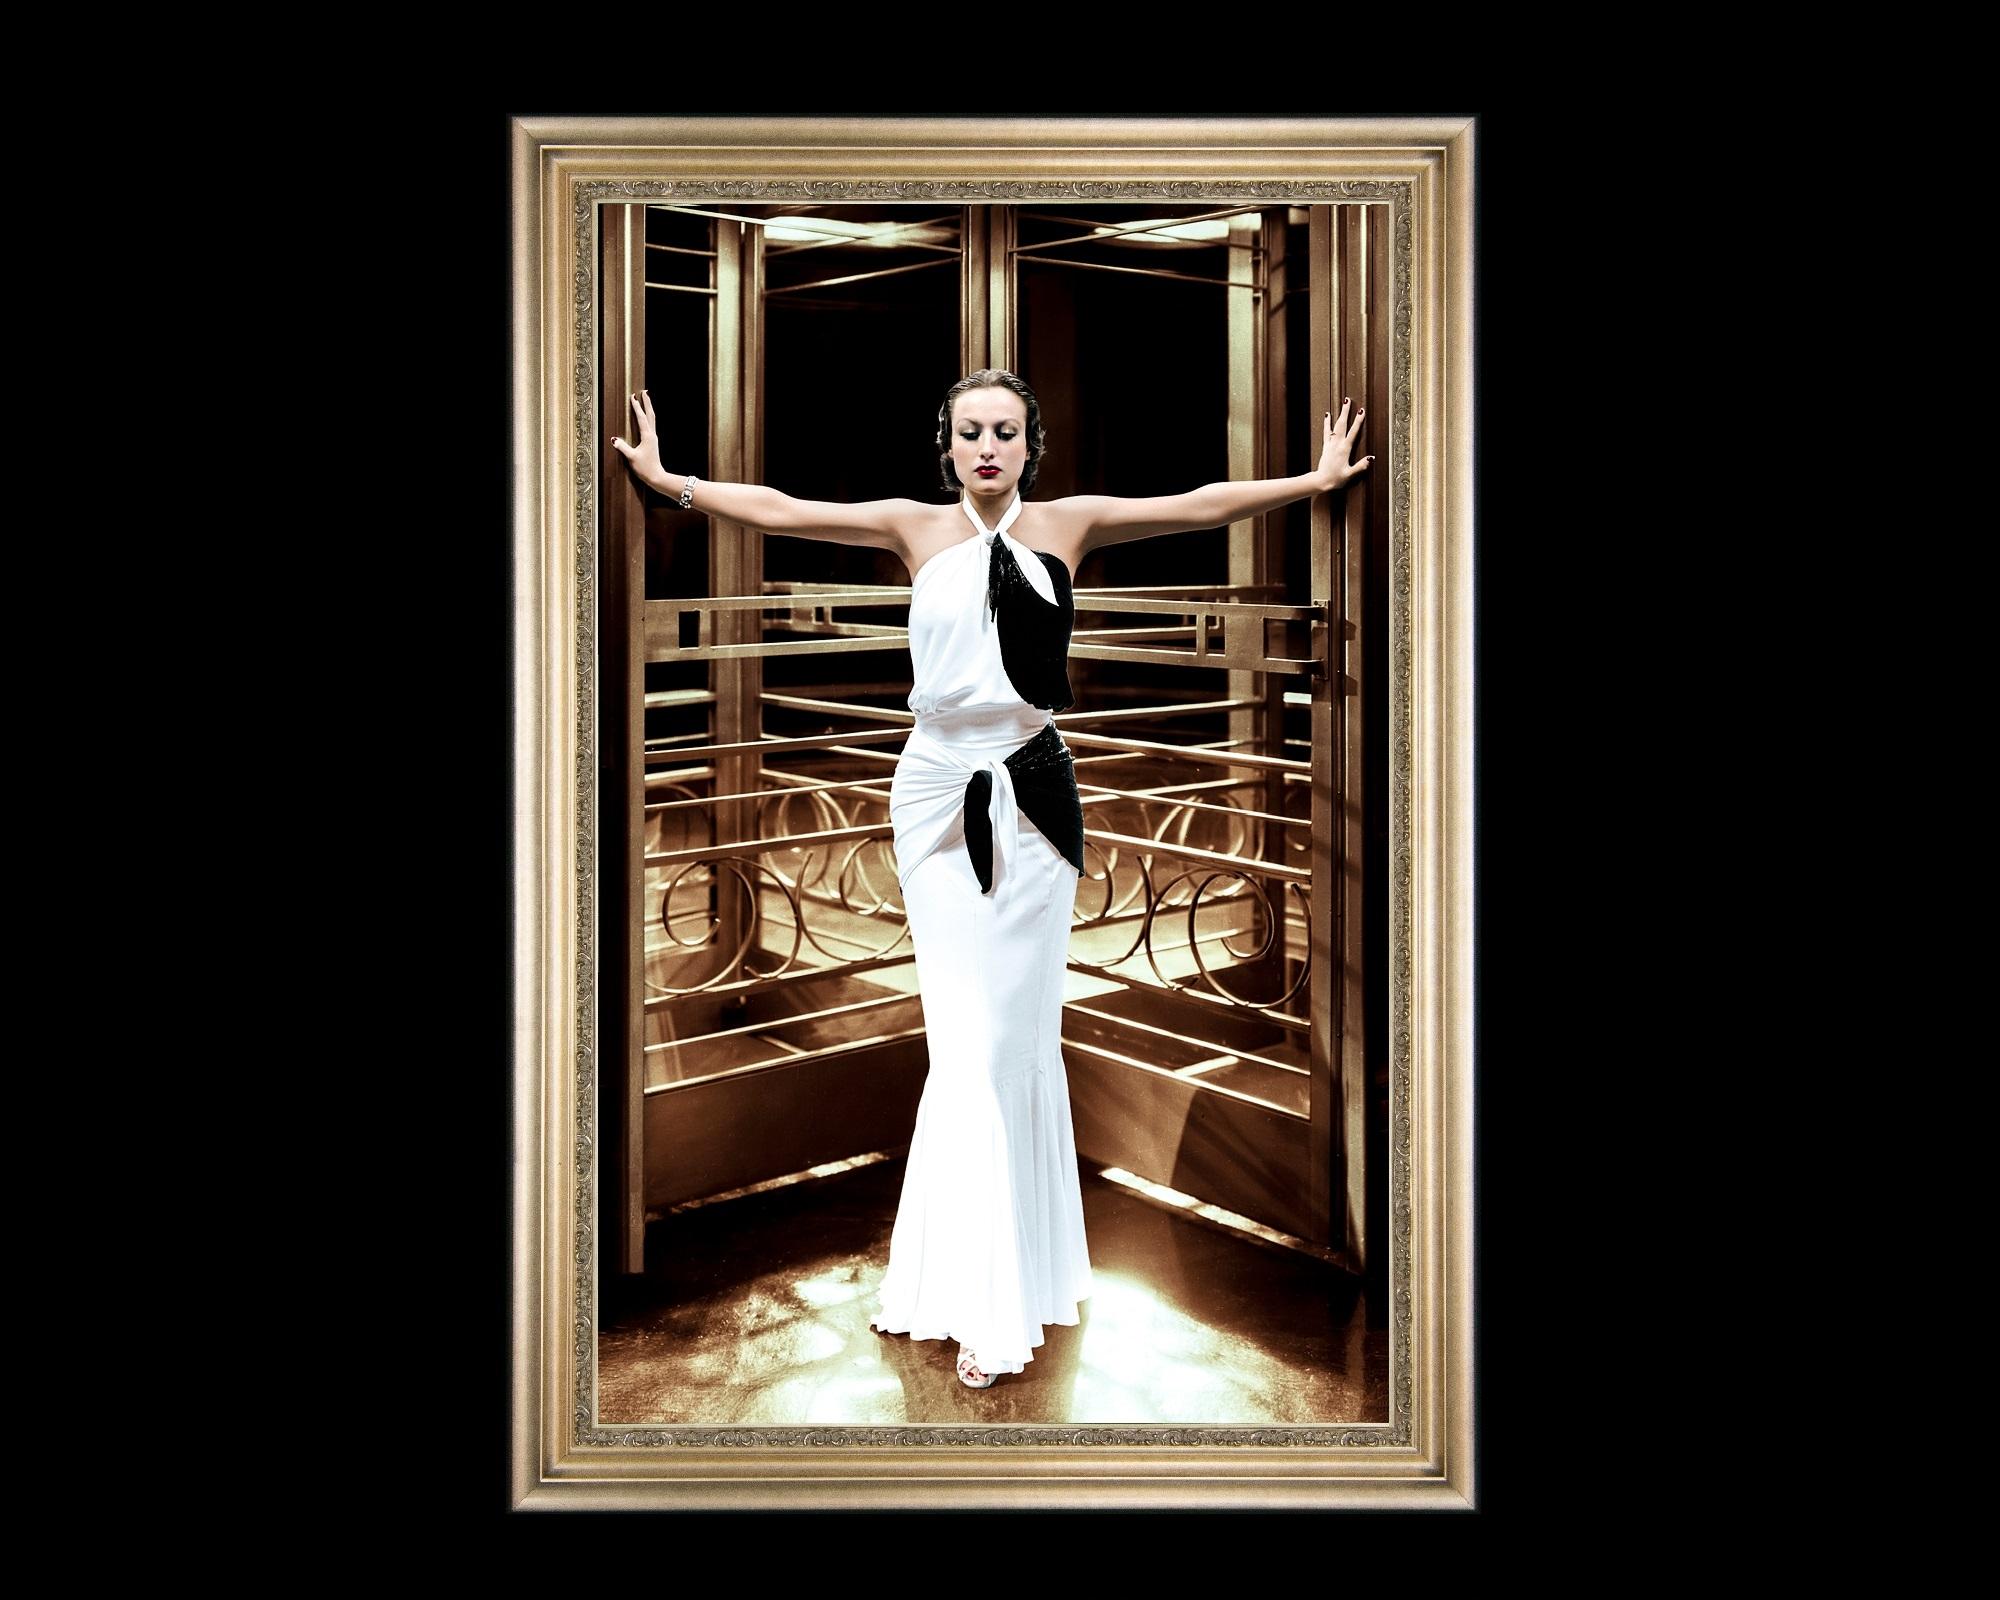 This large Hollywood Regency Photograph is a faithful yet nuanced reproduction of the glamorous 